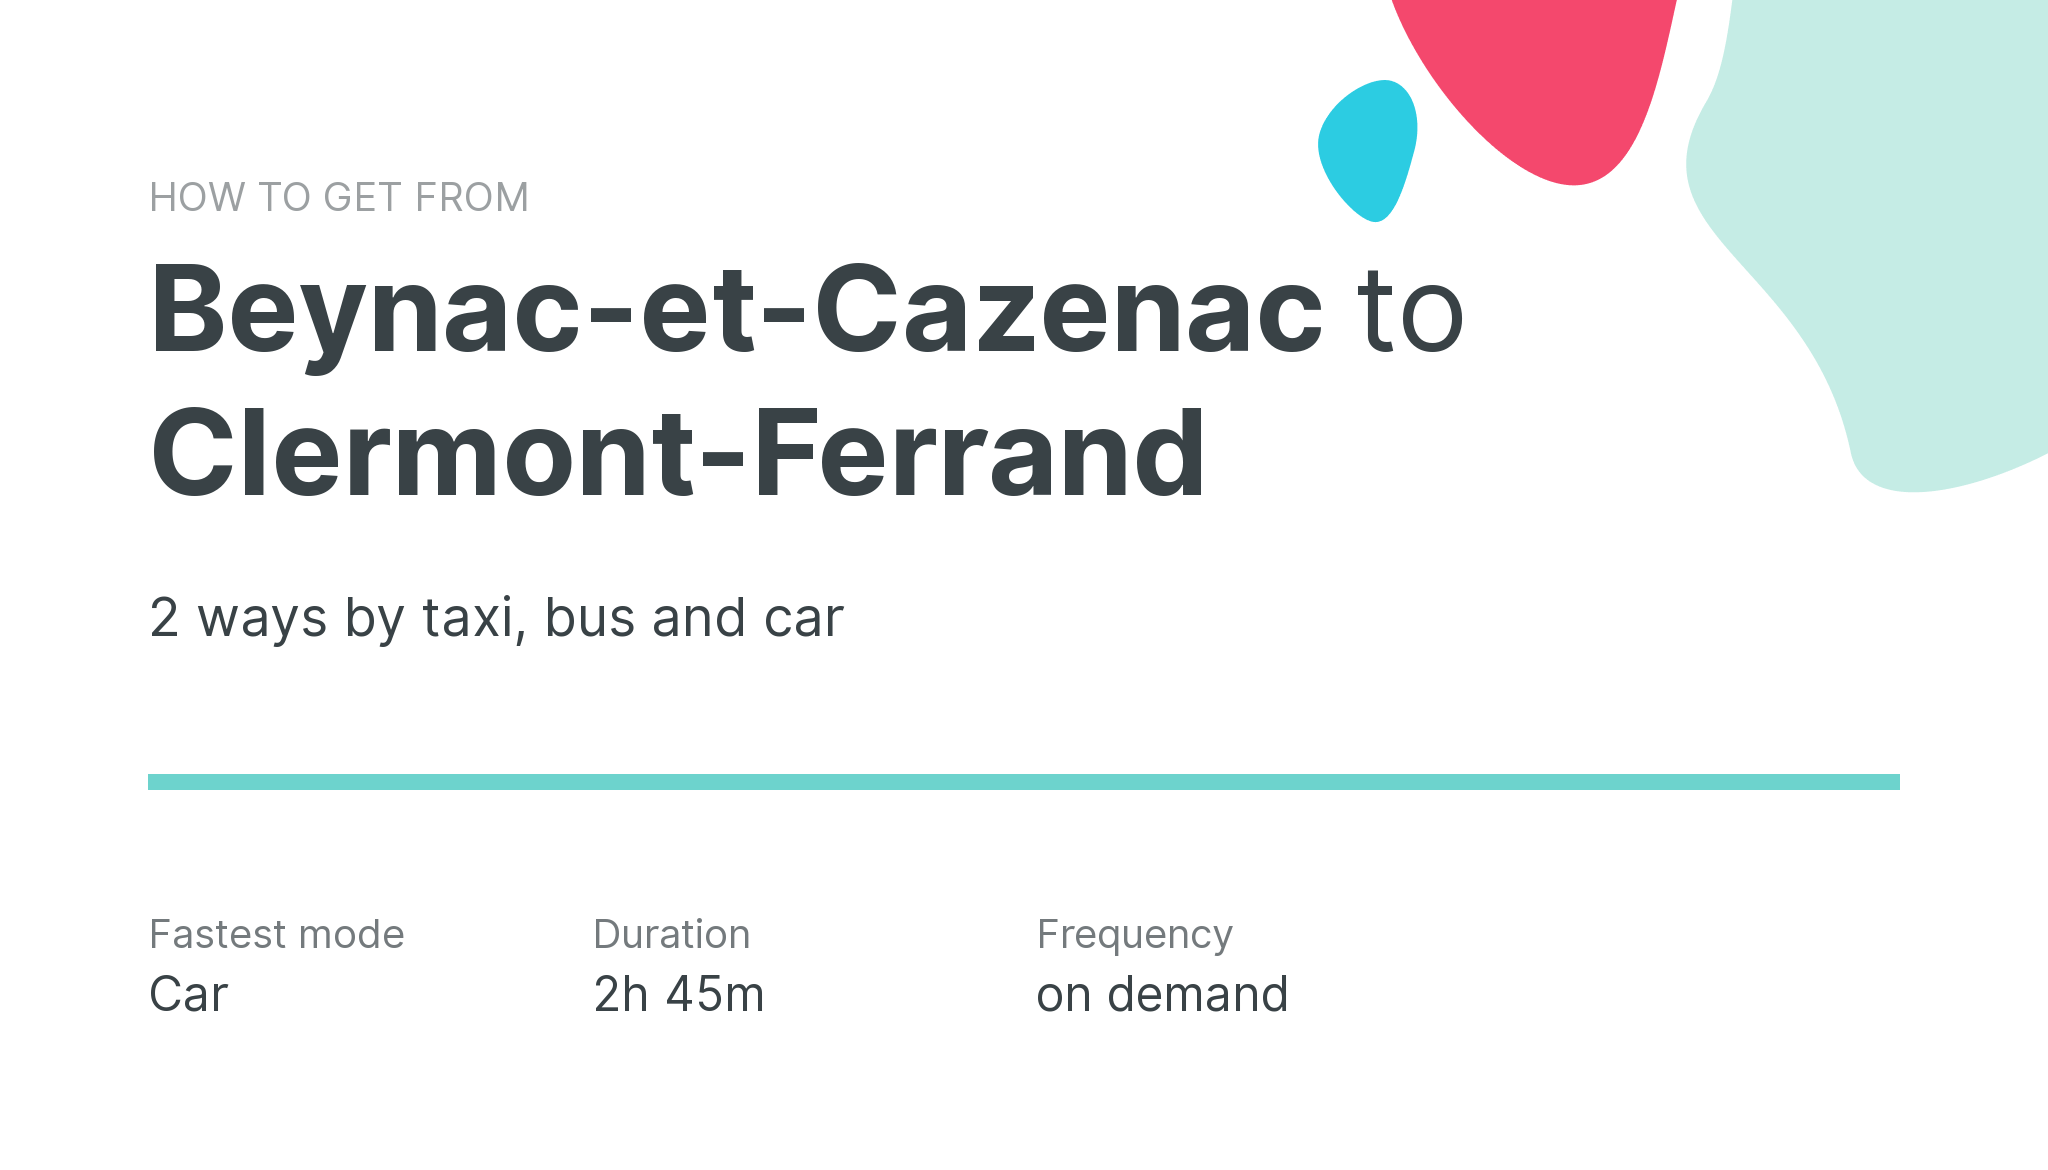 How do I get from Beynac-et-Cazenac to Clermont-Ferrand